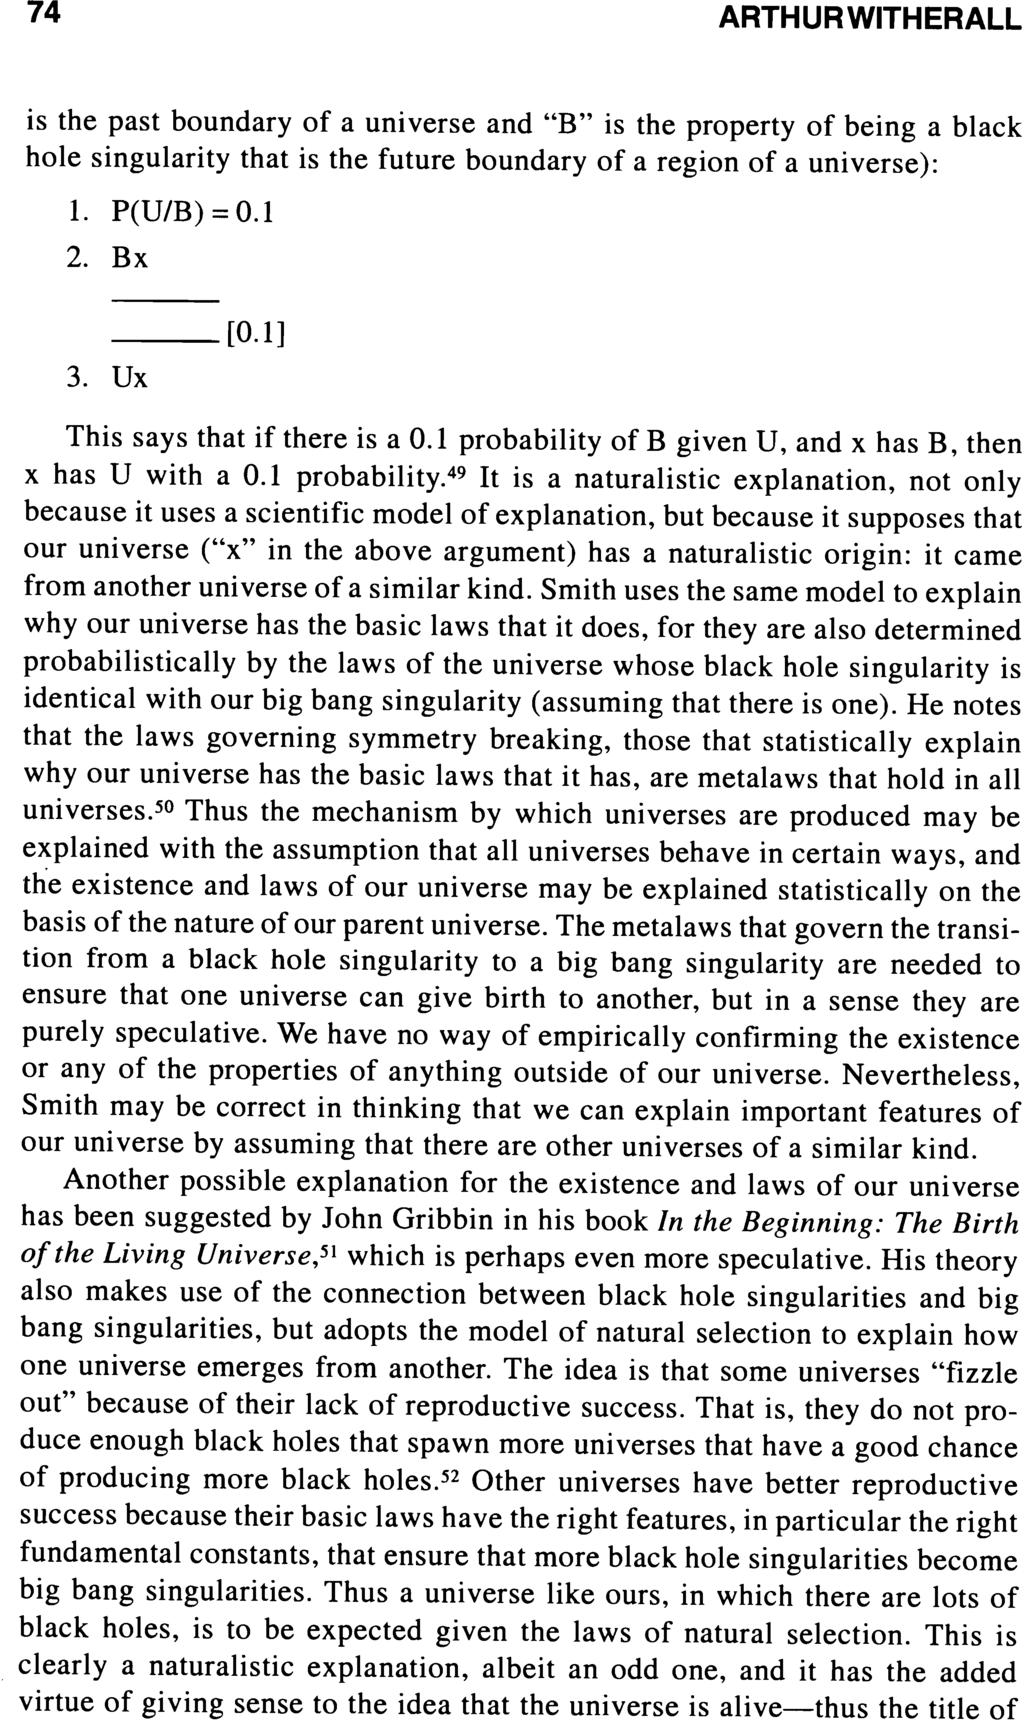 74 ARTHURWITHERALL is the past boundary of a universe and "B" is the property of being a black hole singularity that is the future boundary of a region of a universe): 1. P(U/B)=O.l 2. Bx 3. Ux [0.